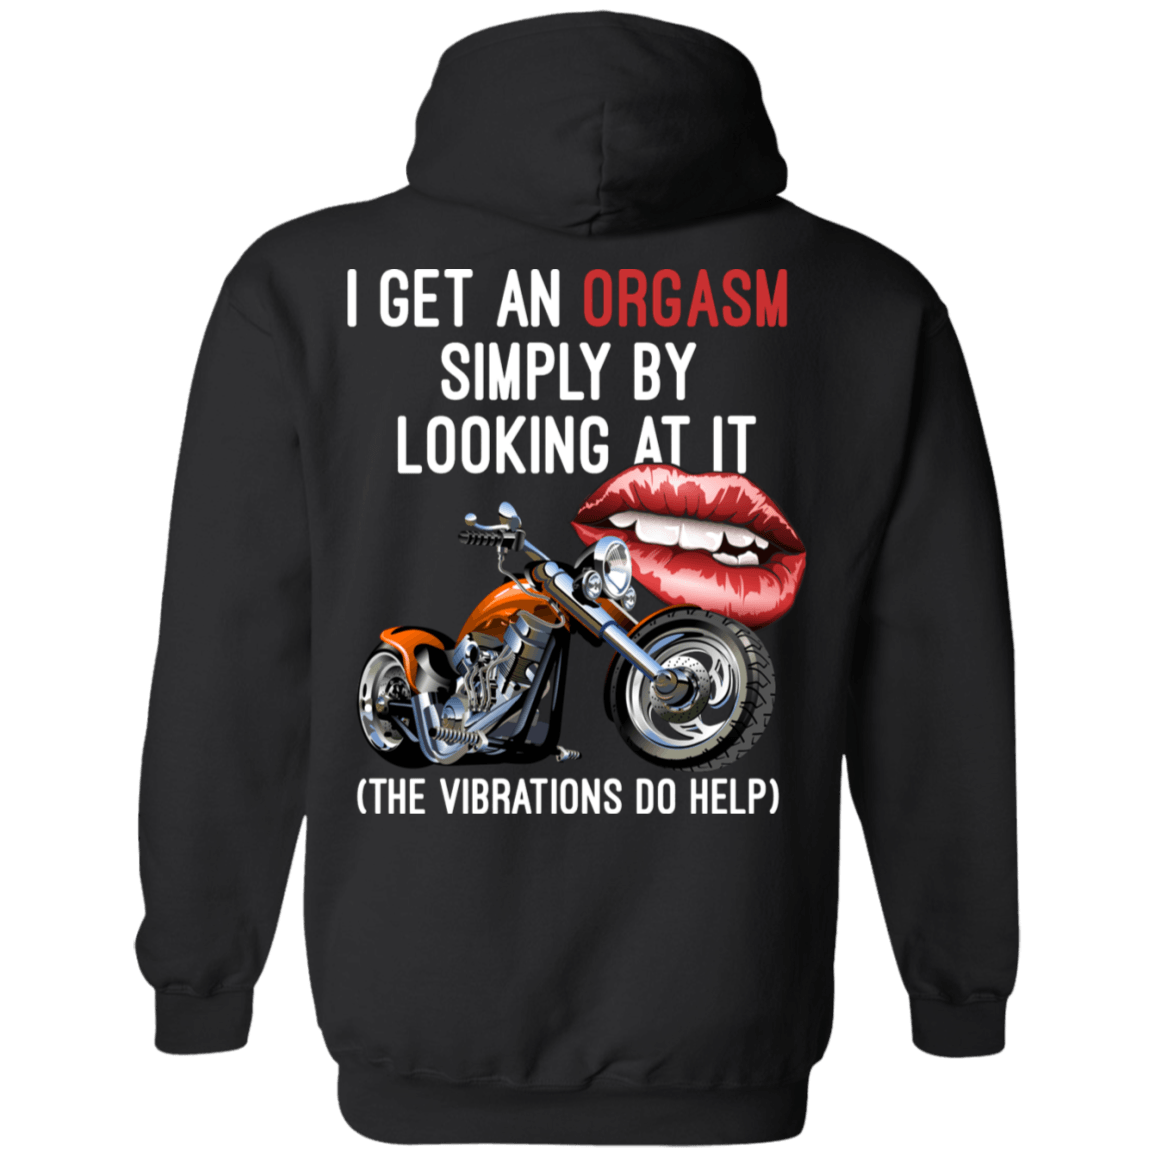 Women's "I Get An Orgasm Simply By Looking At It" Hoodie - American Legend Rider